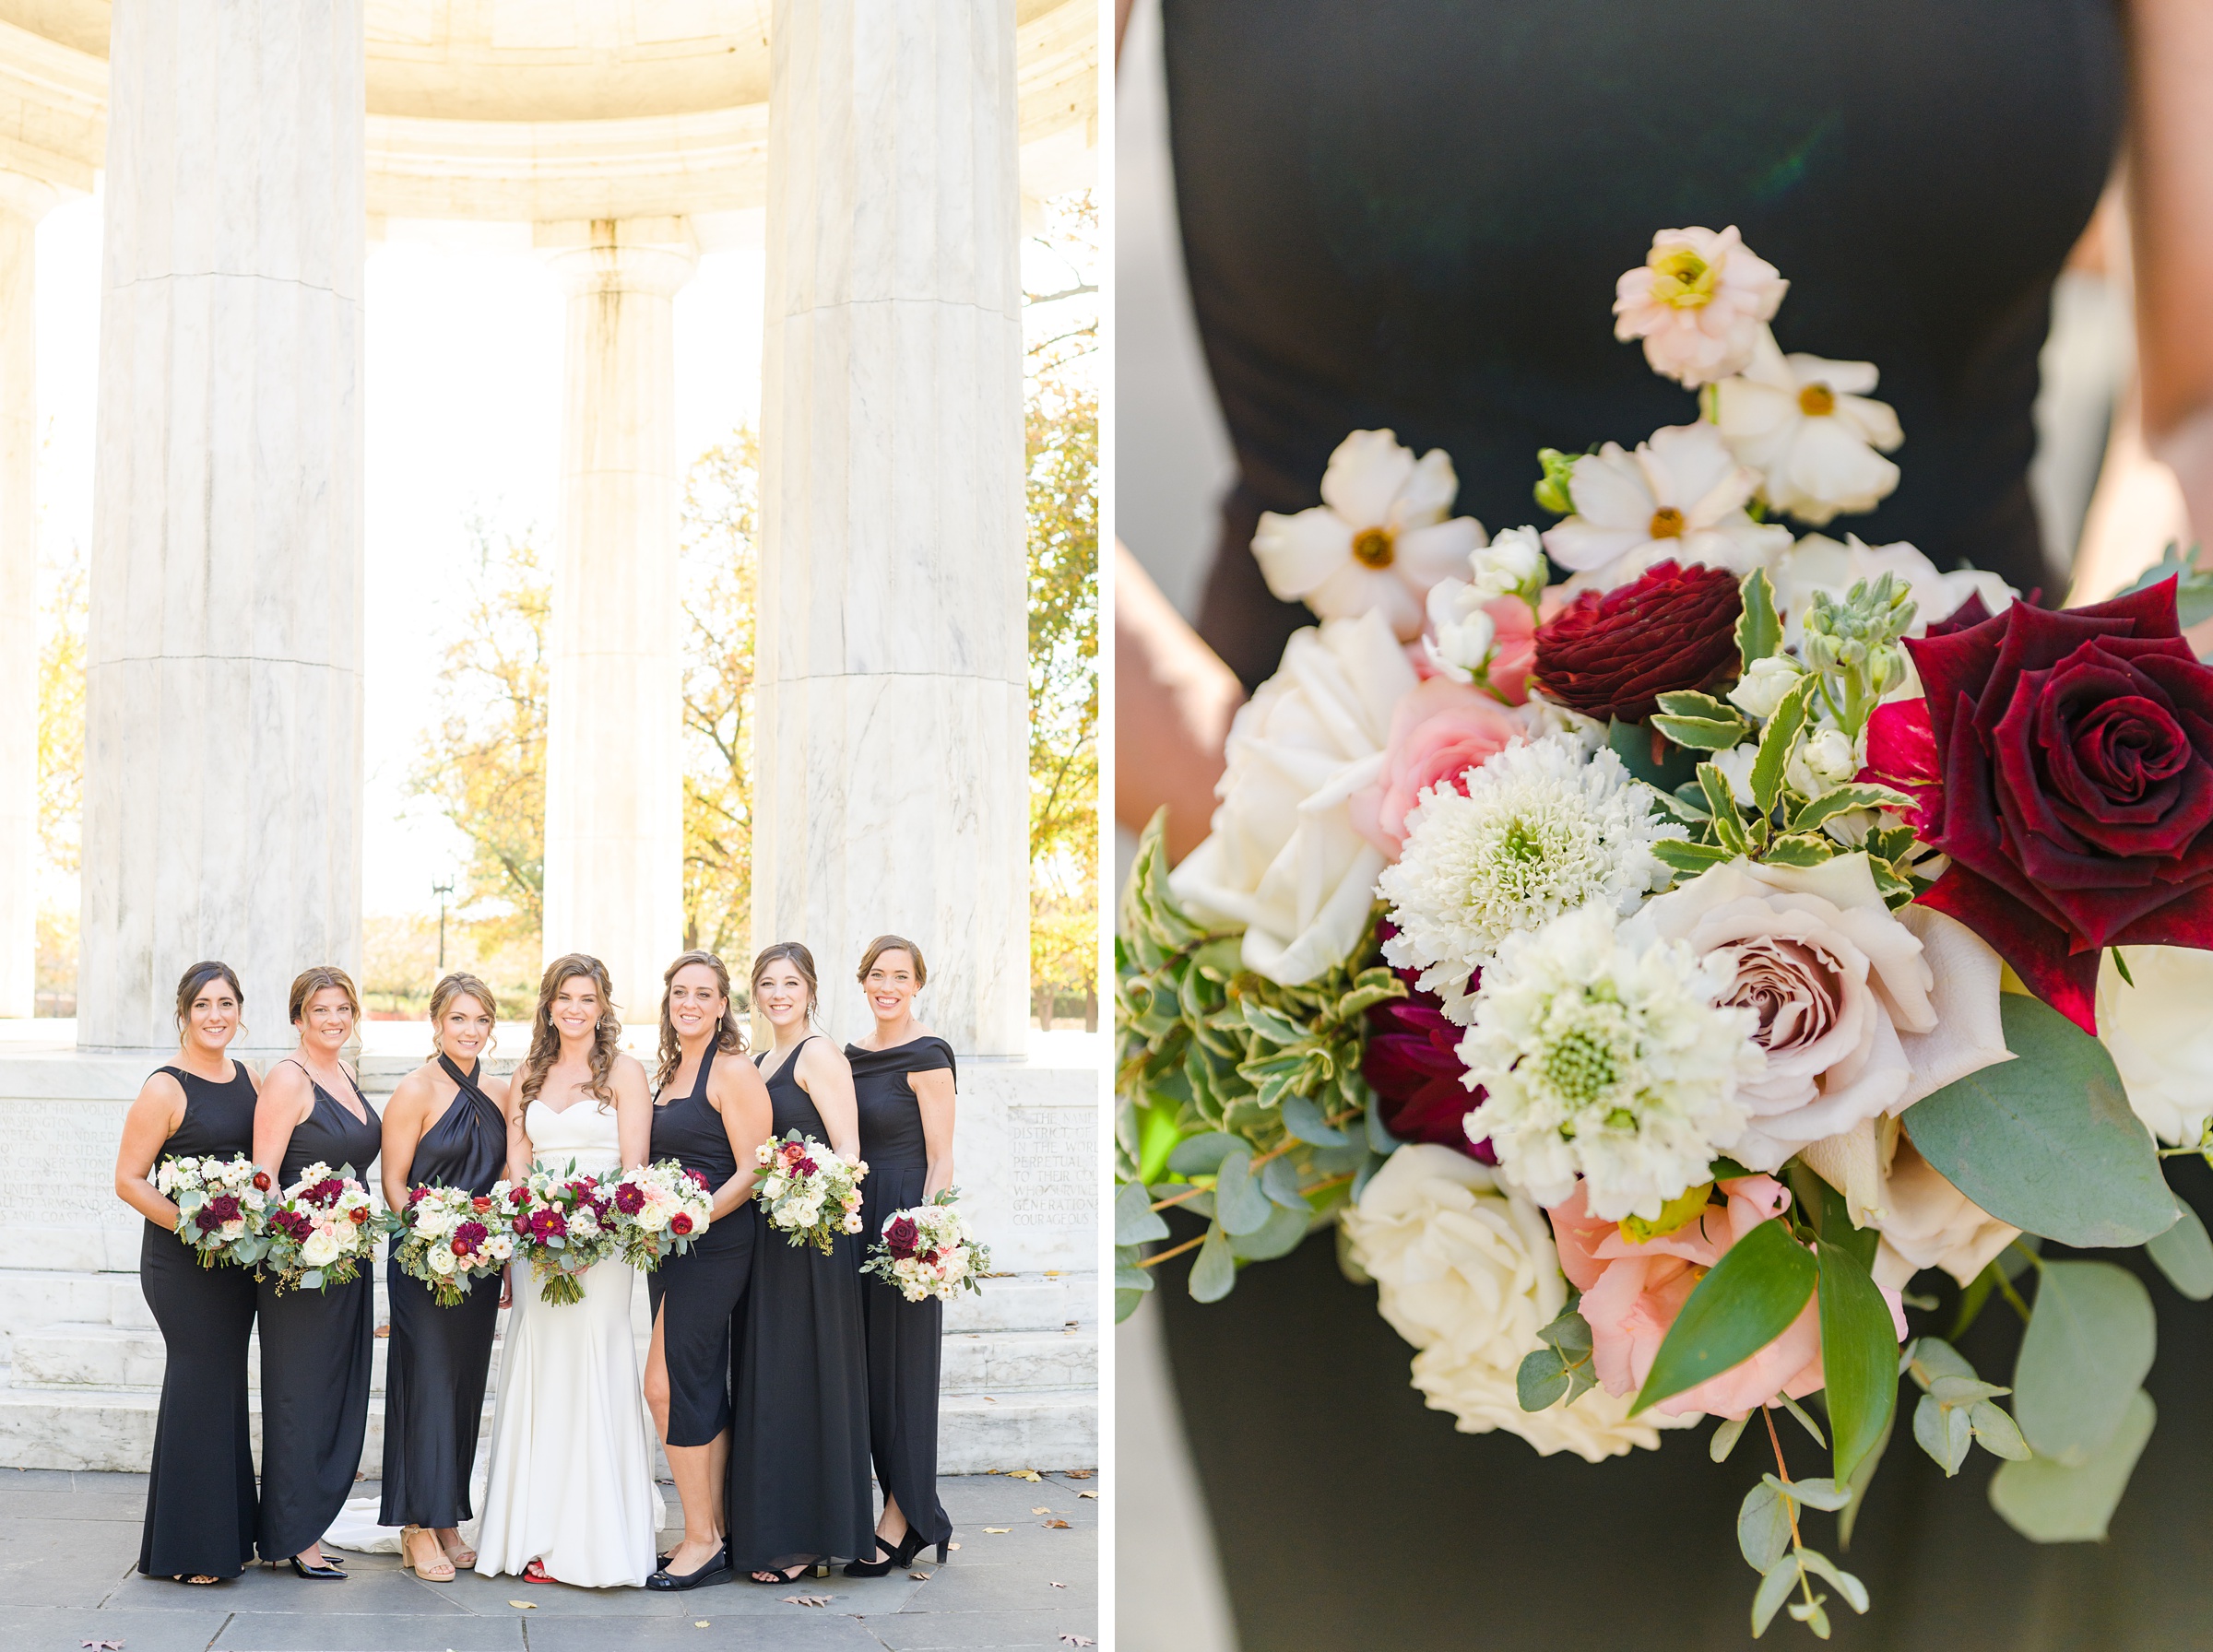 Burgundy and white Fall wedding day portraits and details featuring Mayflower Hotel DC wedding photos photographed by Baltimore wedding photographer Cait Kramer Photography